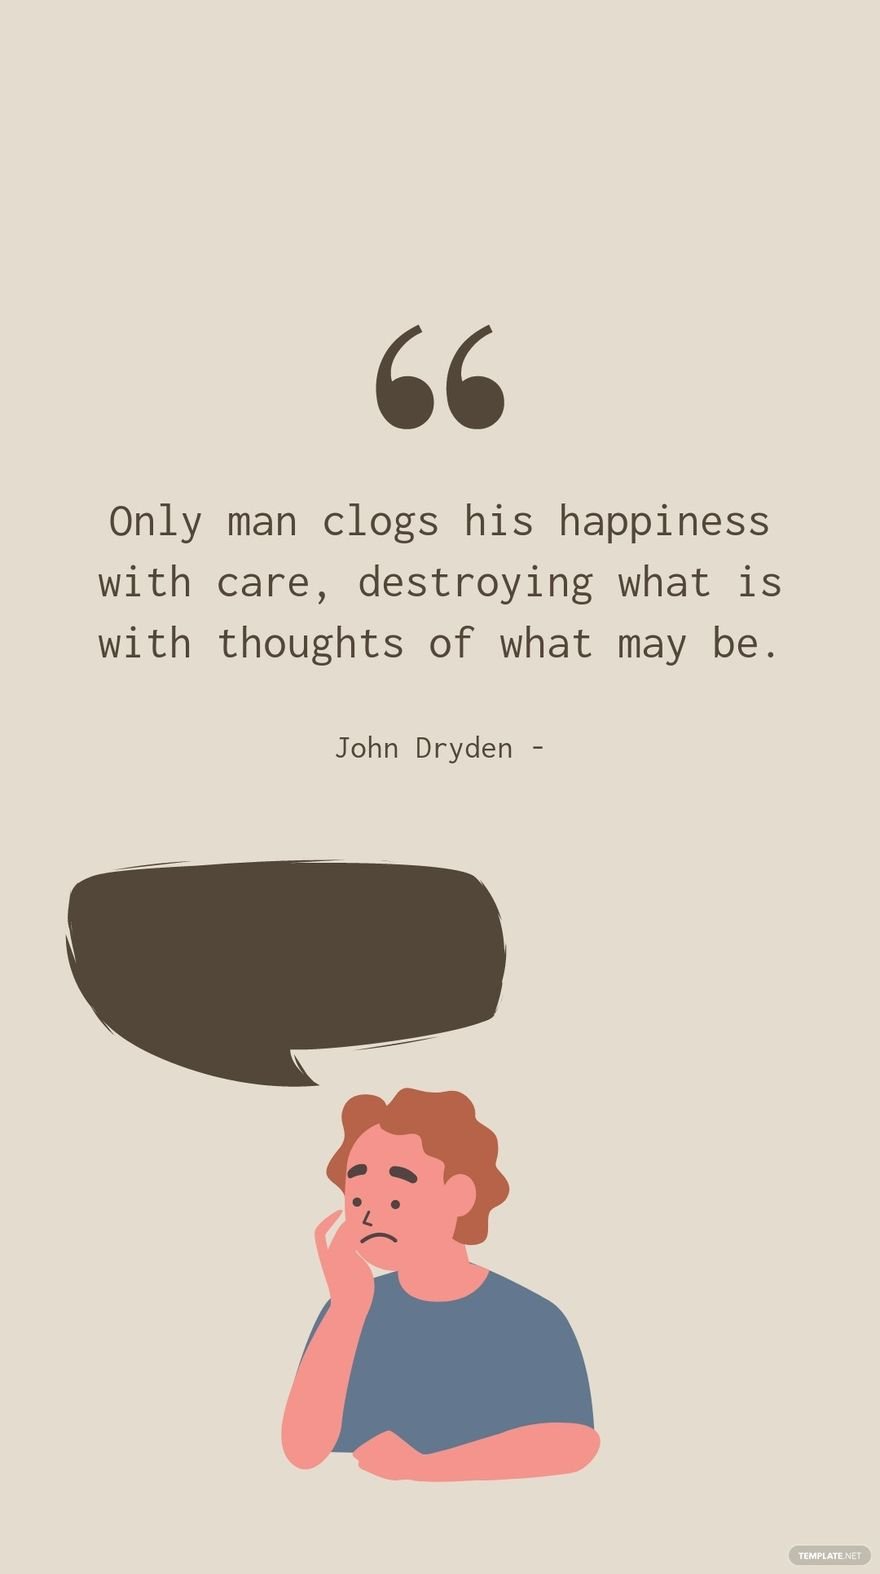 John Dryden - Only man clogs his happiness with care, destroying what is with thoughts of what may be.